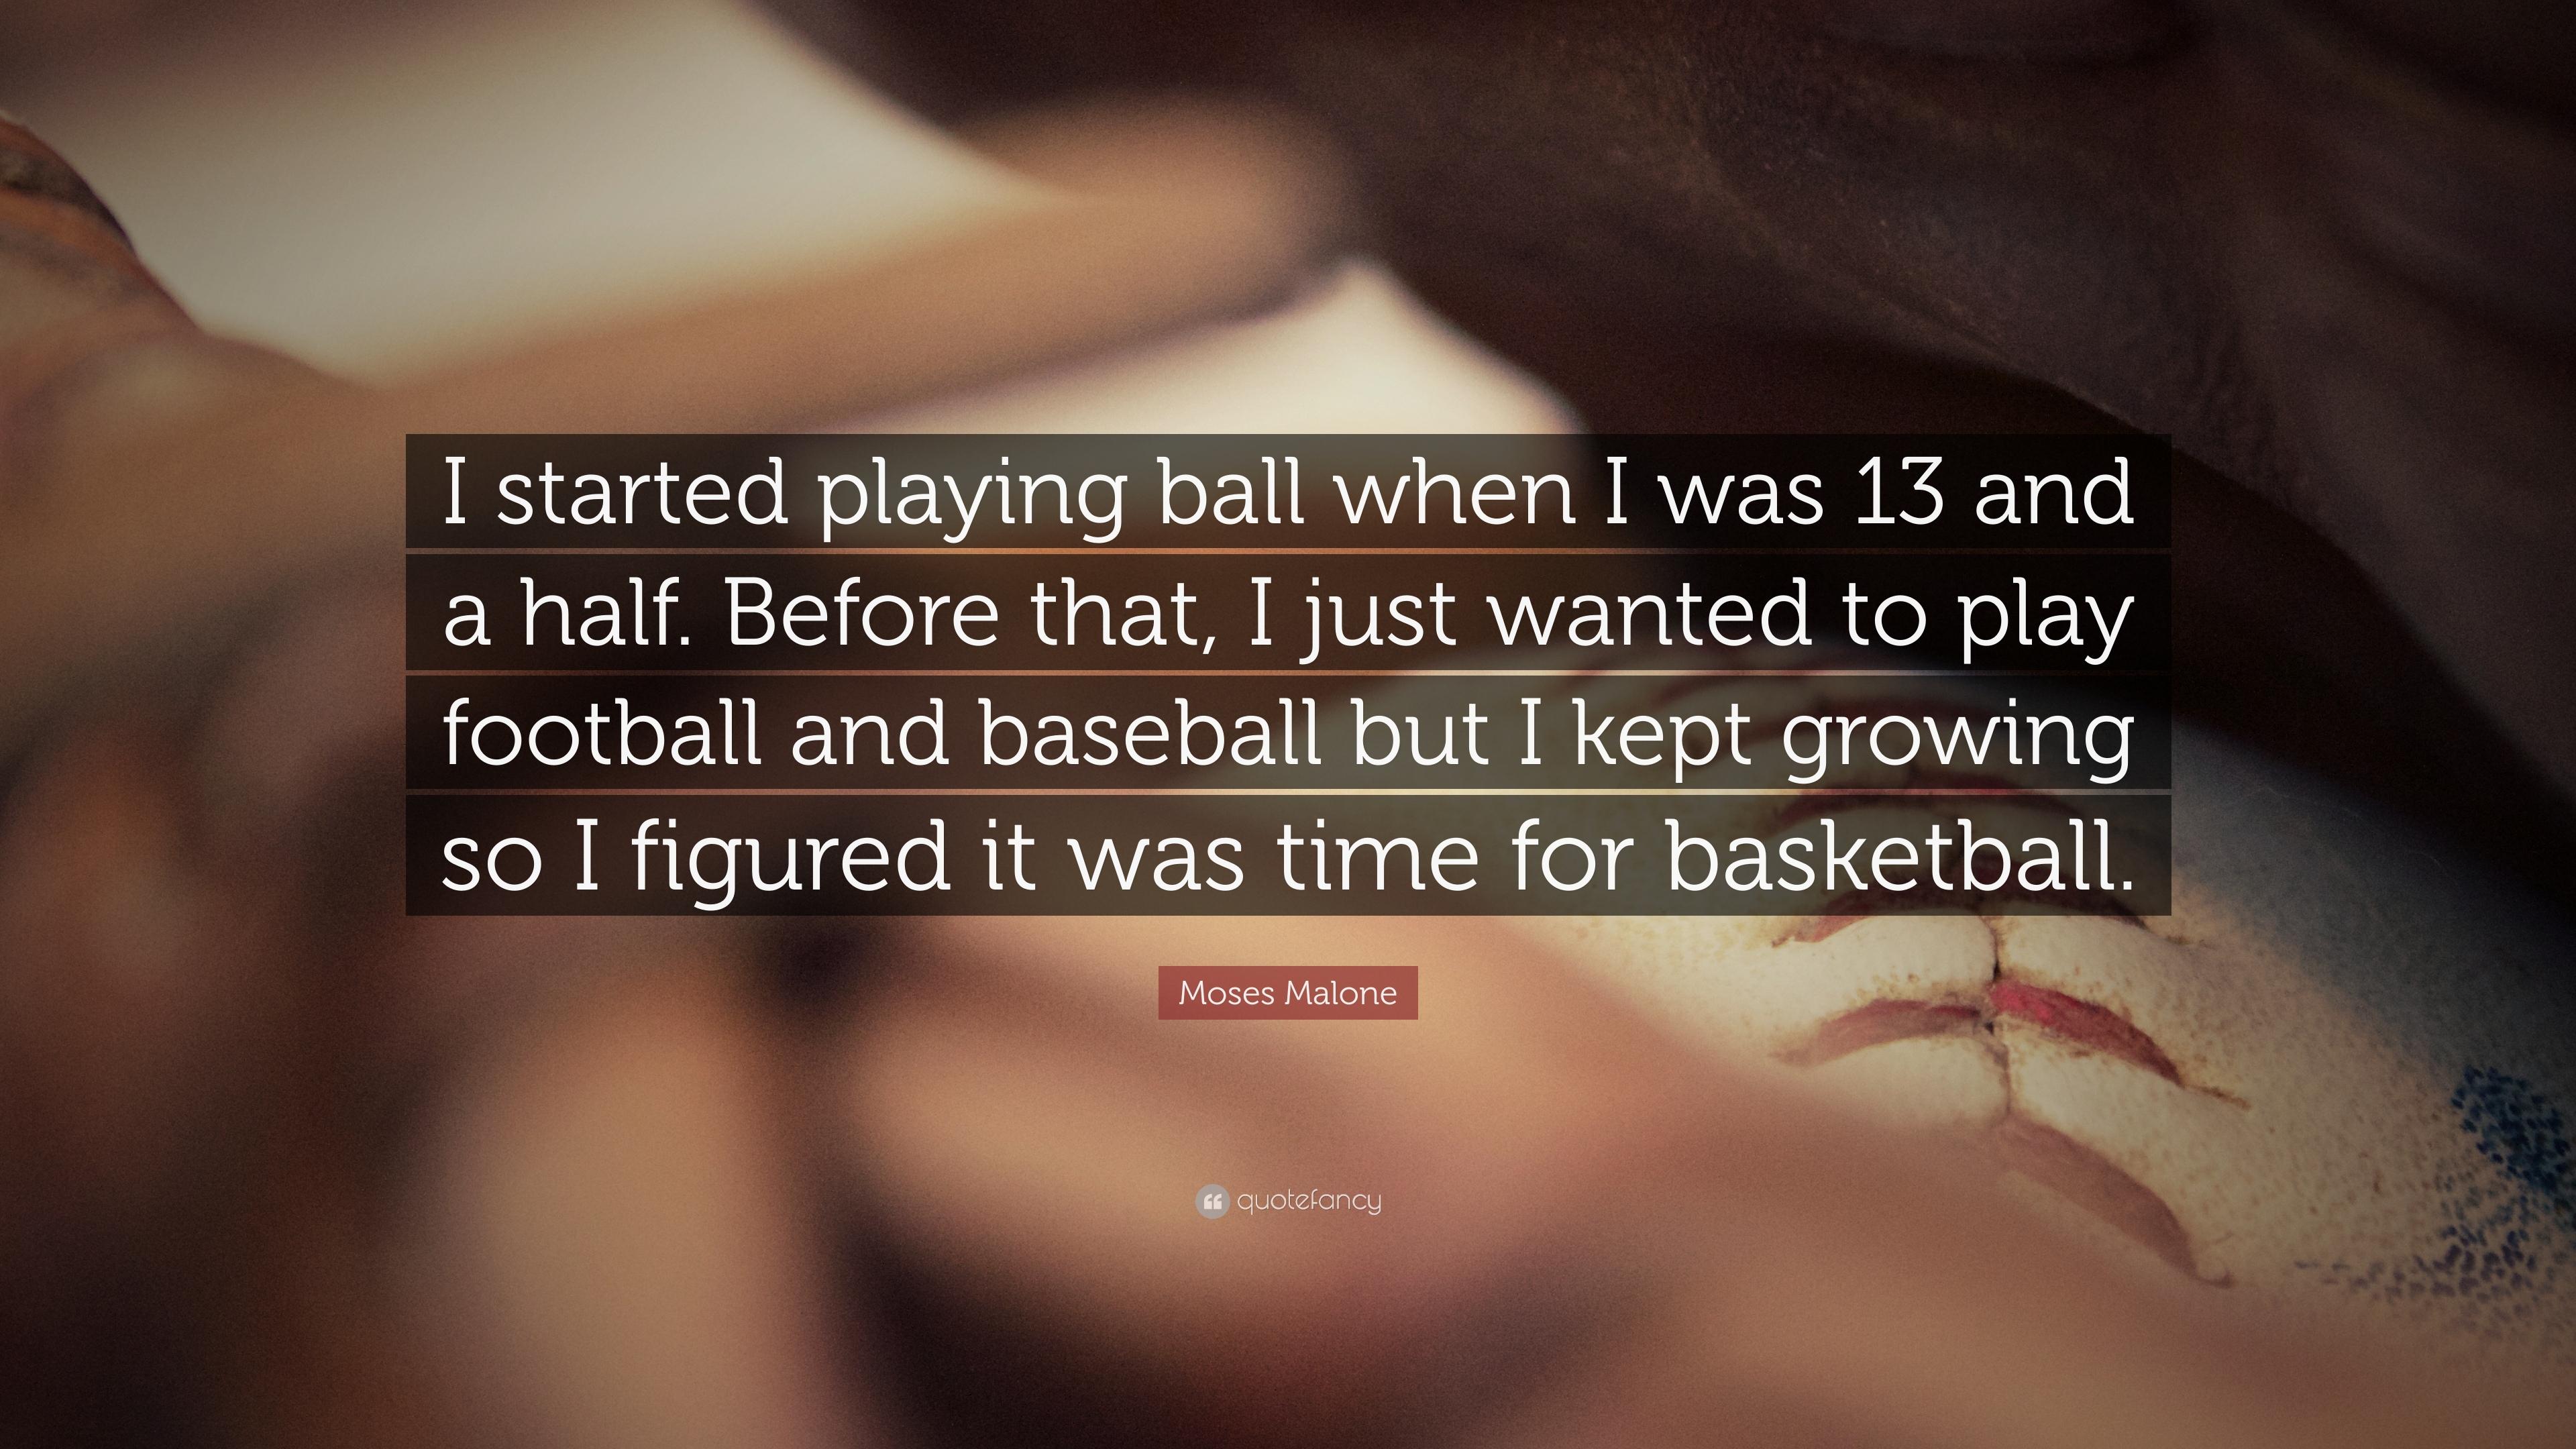 Moses Malone Quote: “I started playing ball when I was 13 and a half